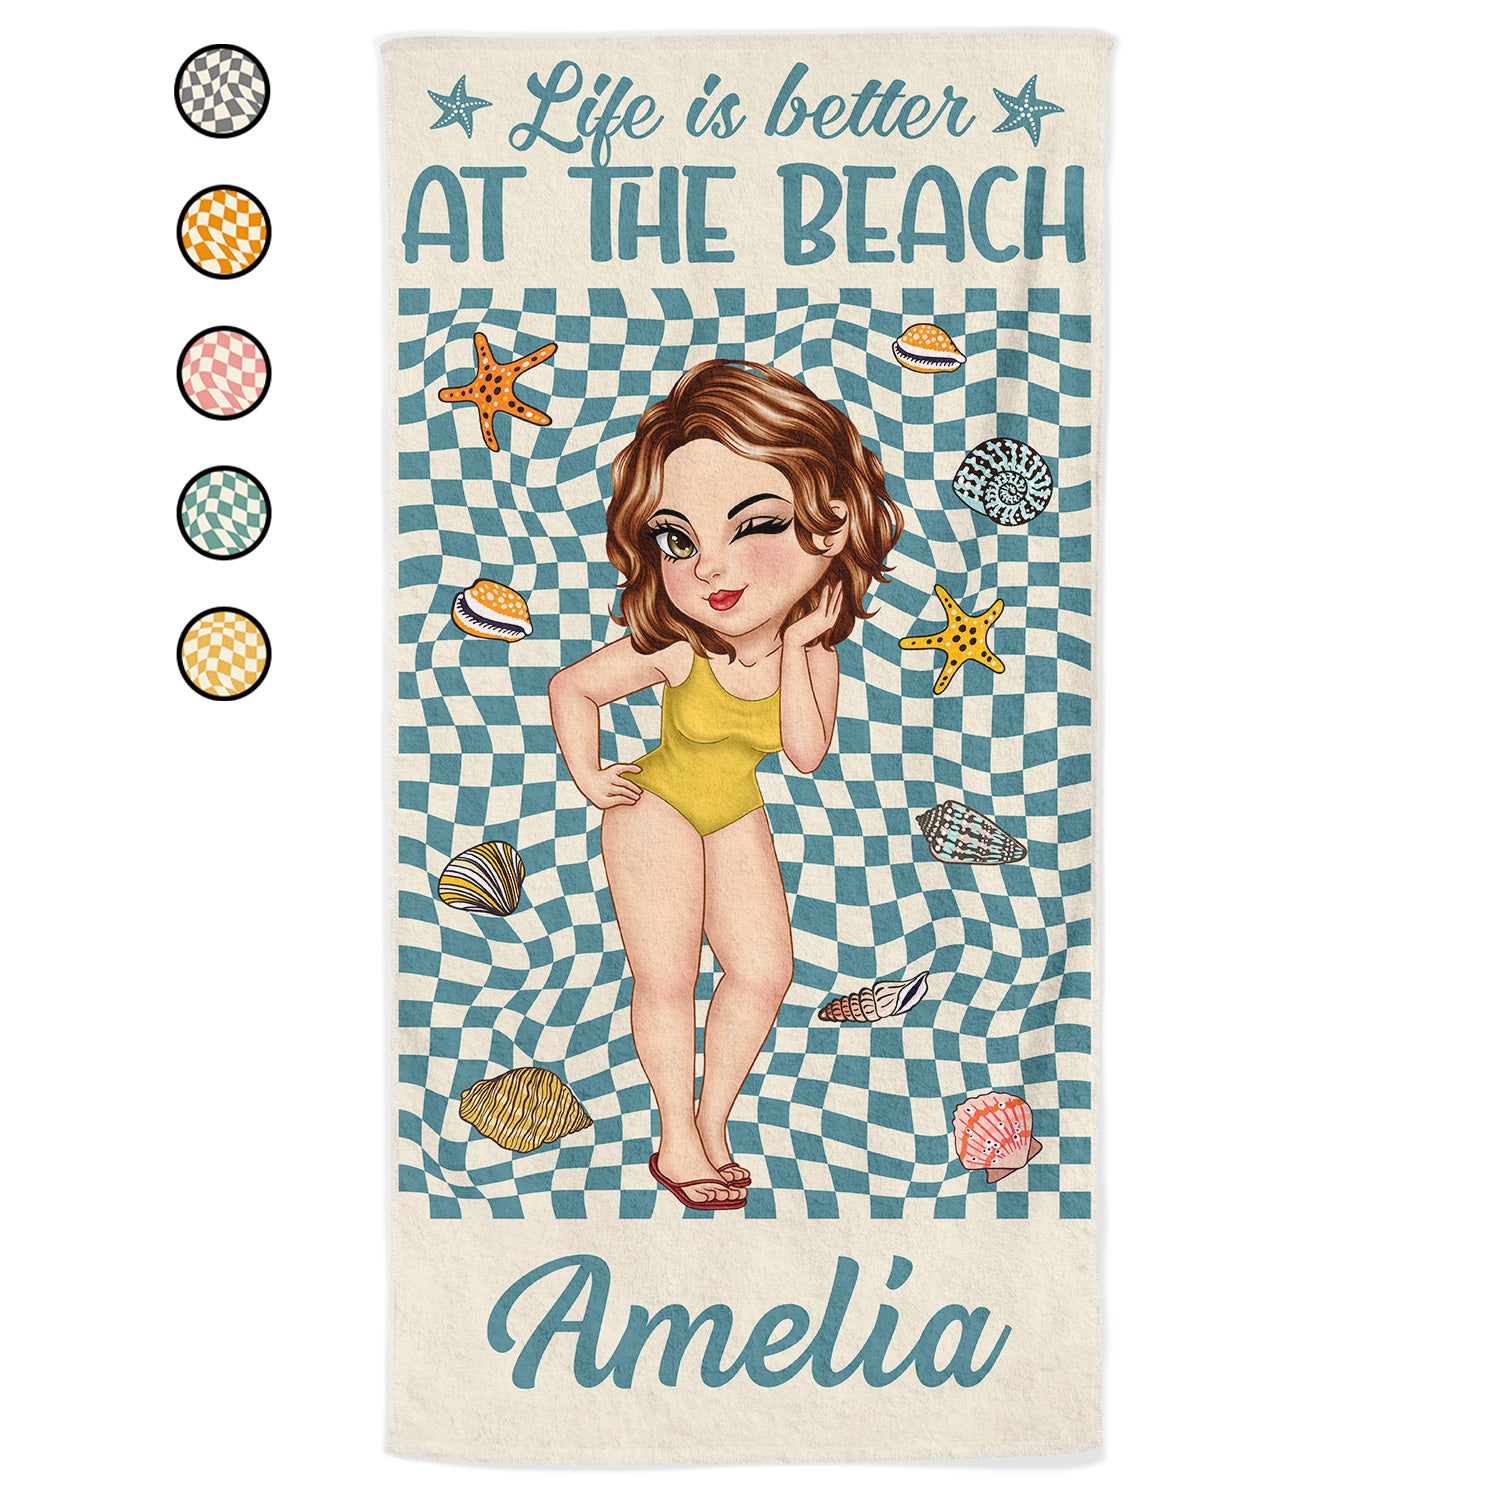 Life Is Better At The Beach Traveling Poolside Swimming Picnic - Birthday, Vacation Gift For Her, Besties, Family - Personalized Beach Towel